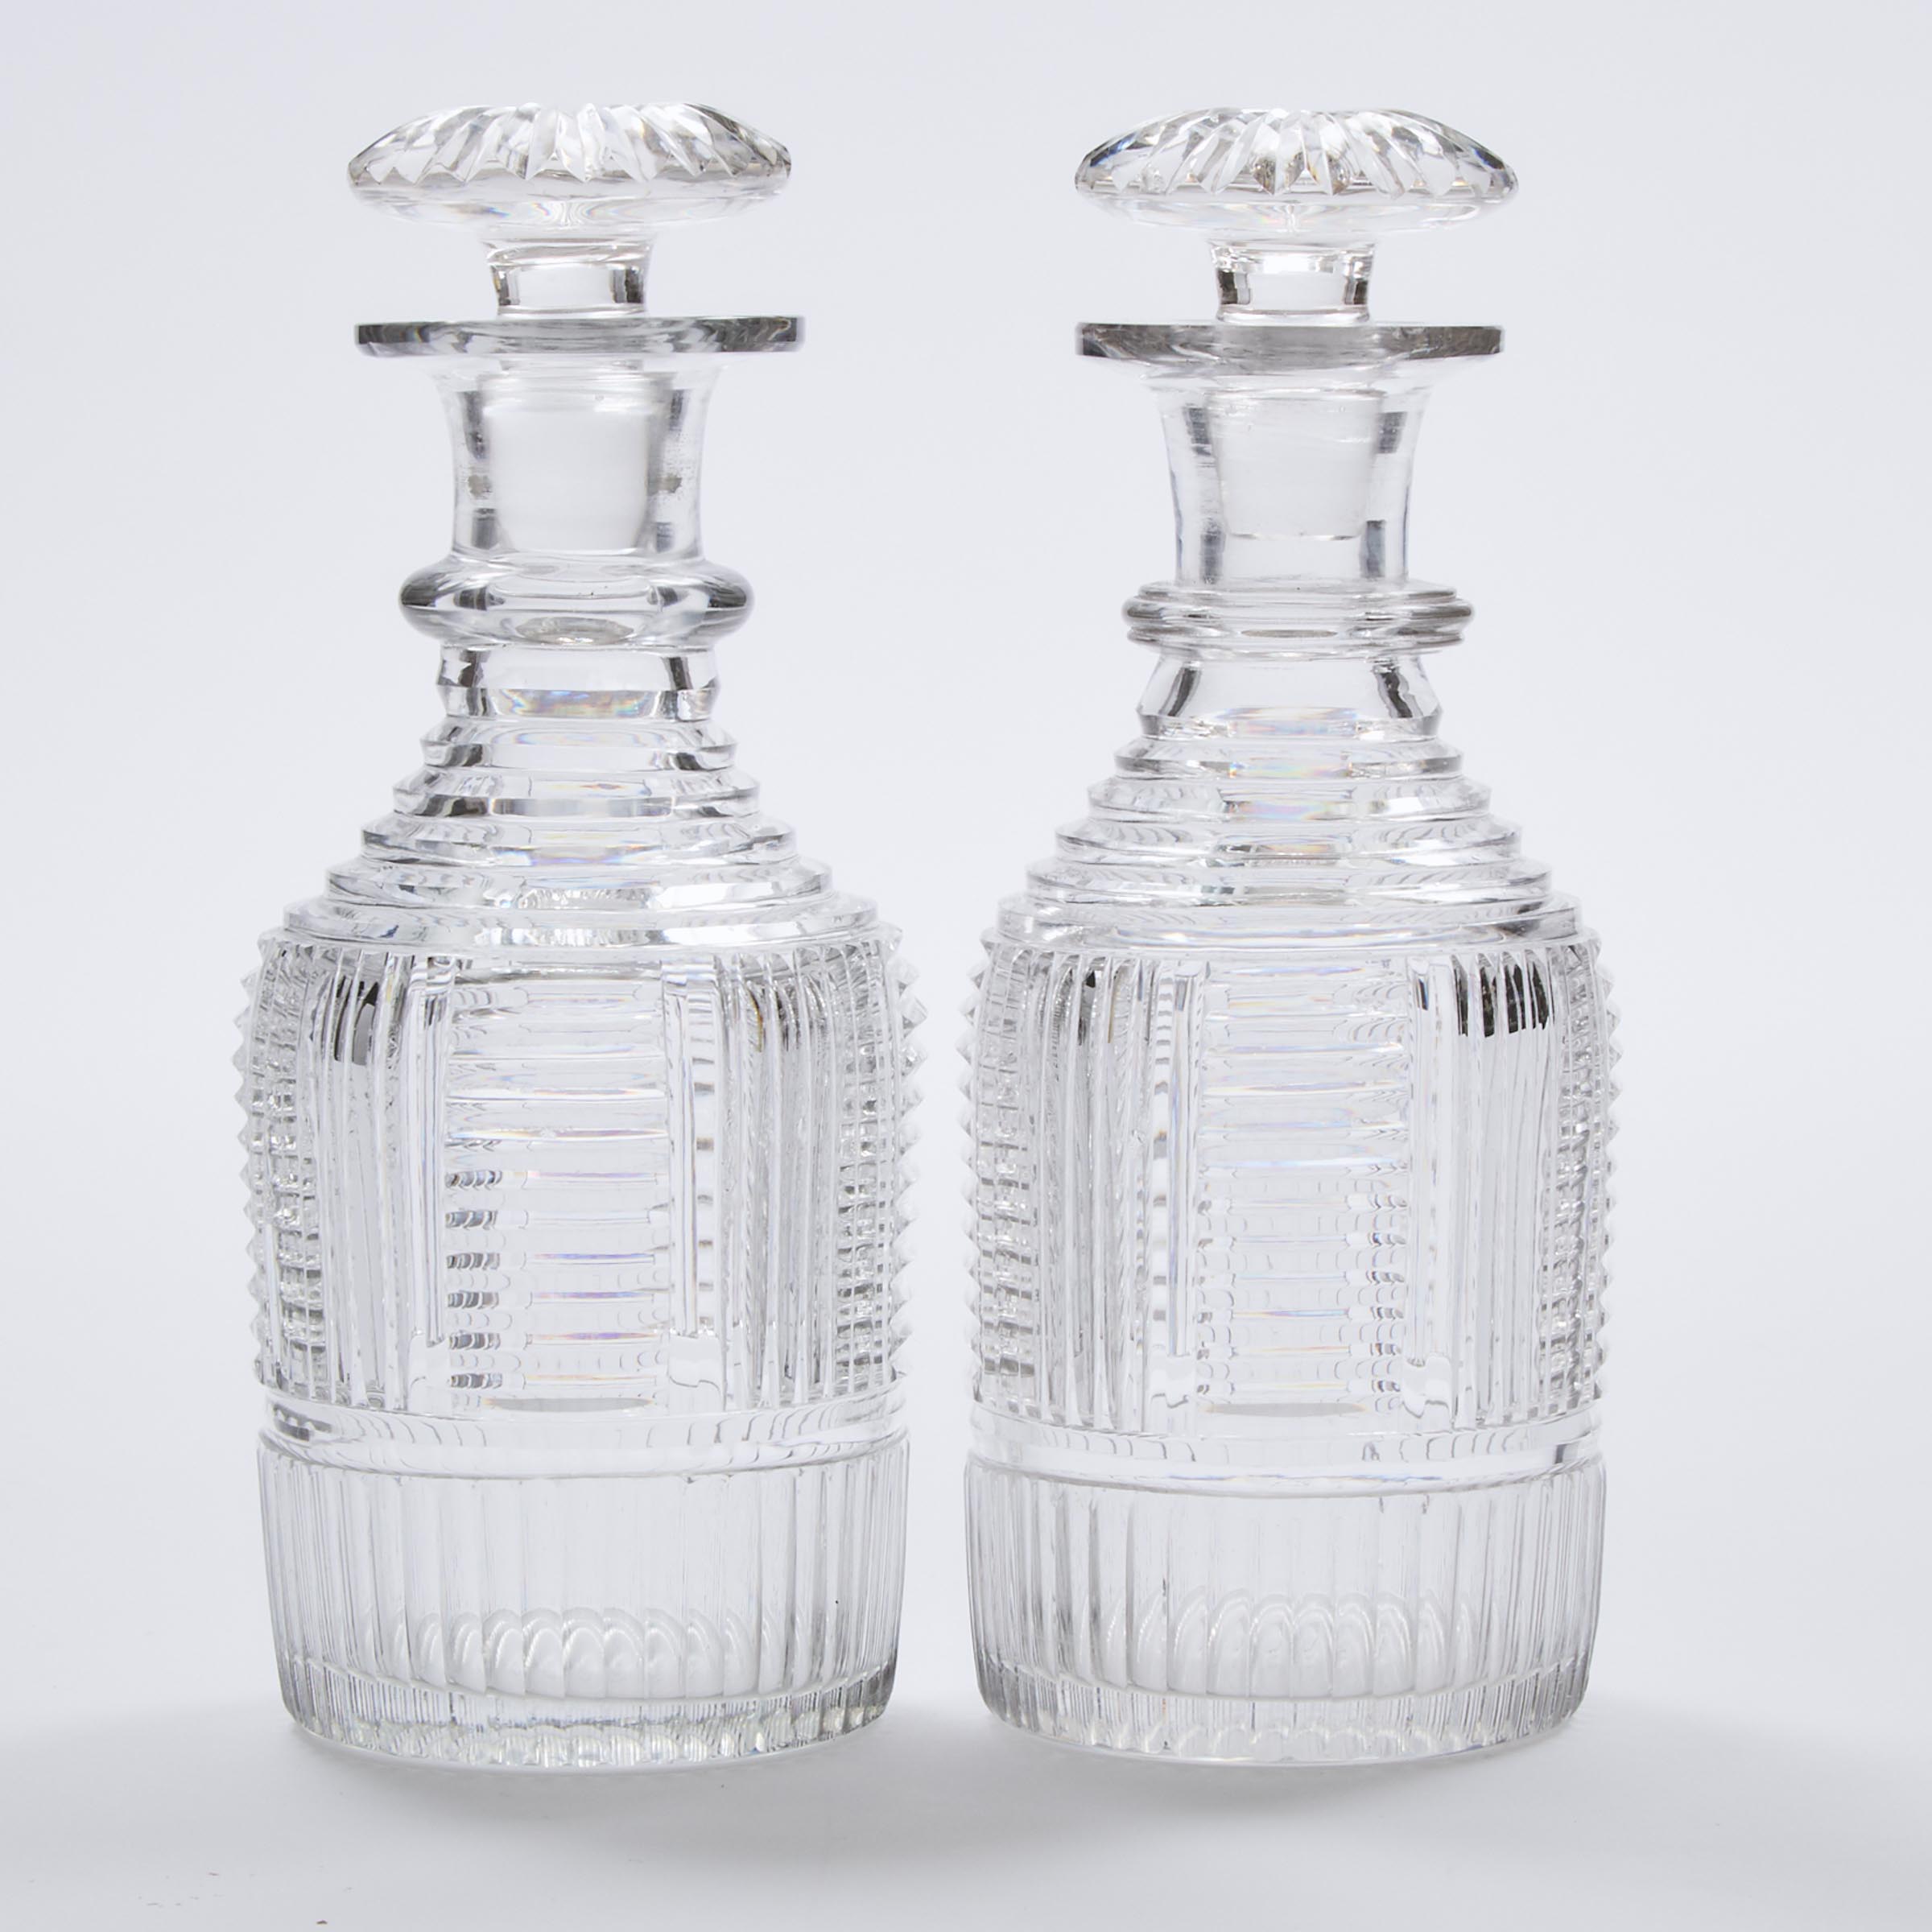 Pair of Anglo-Irish Cut Glass Small Decanters, early 19th century